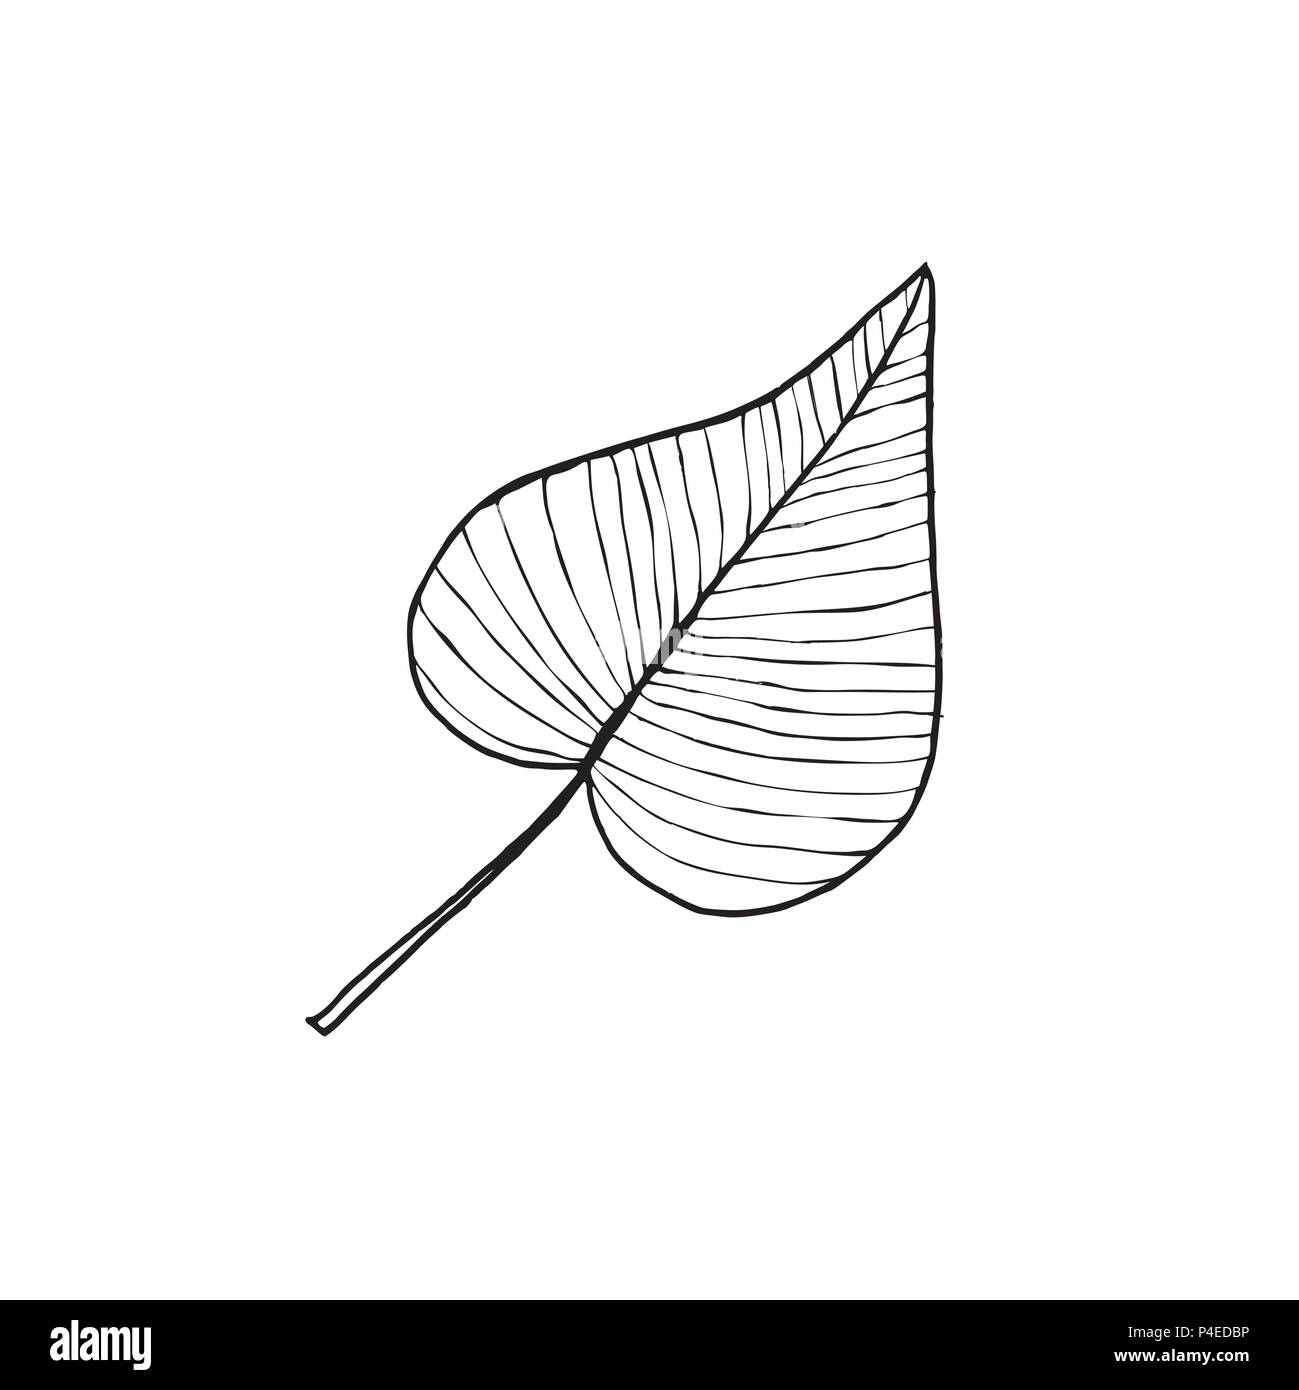 How to Draw a Leaf - Easy Drawing Tutorial For Kids